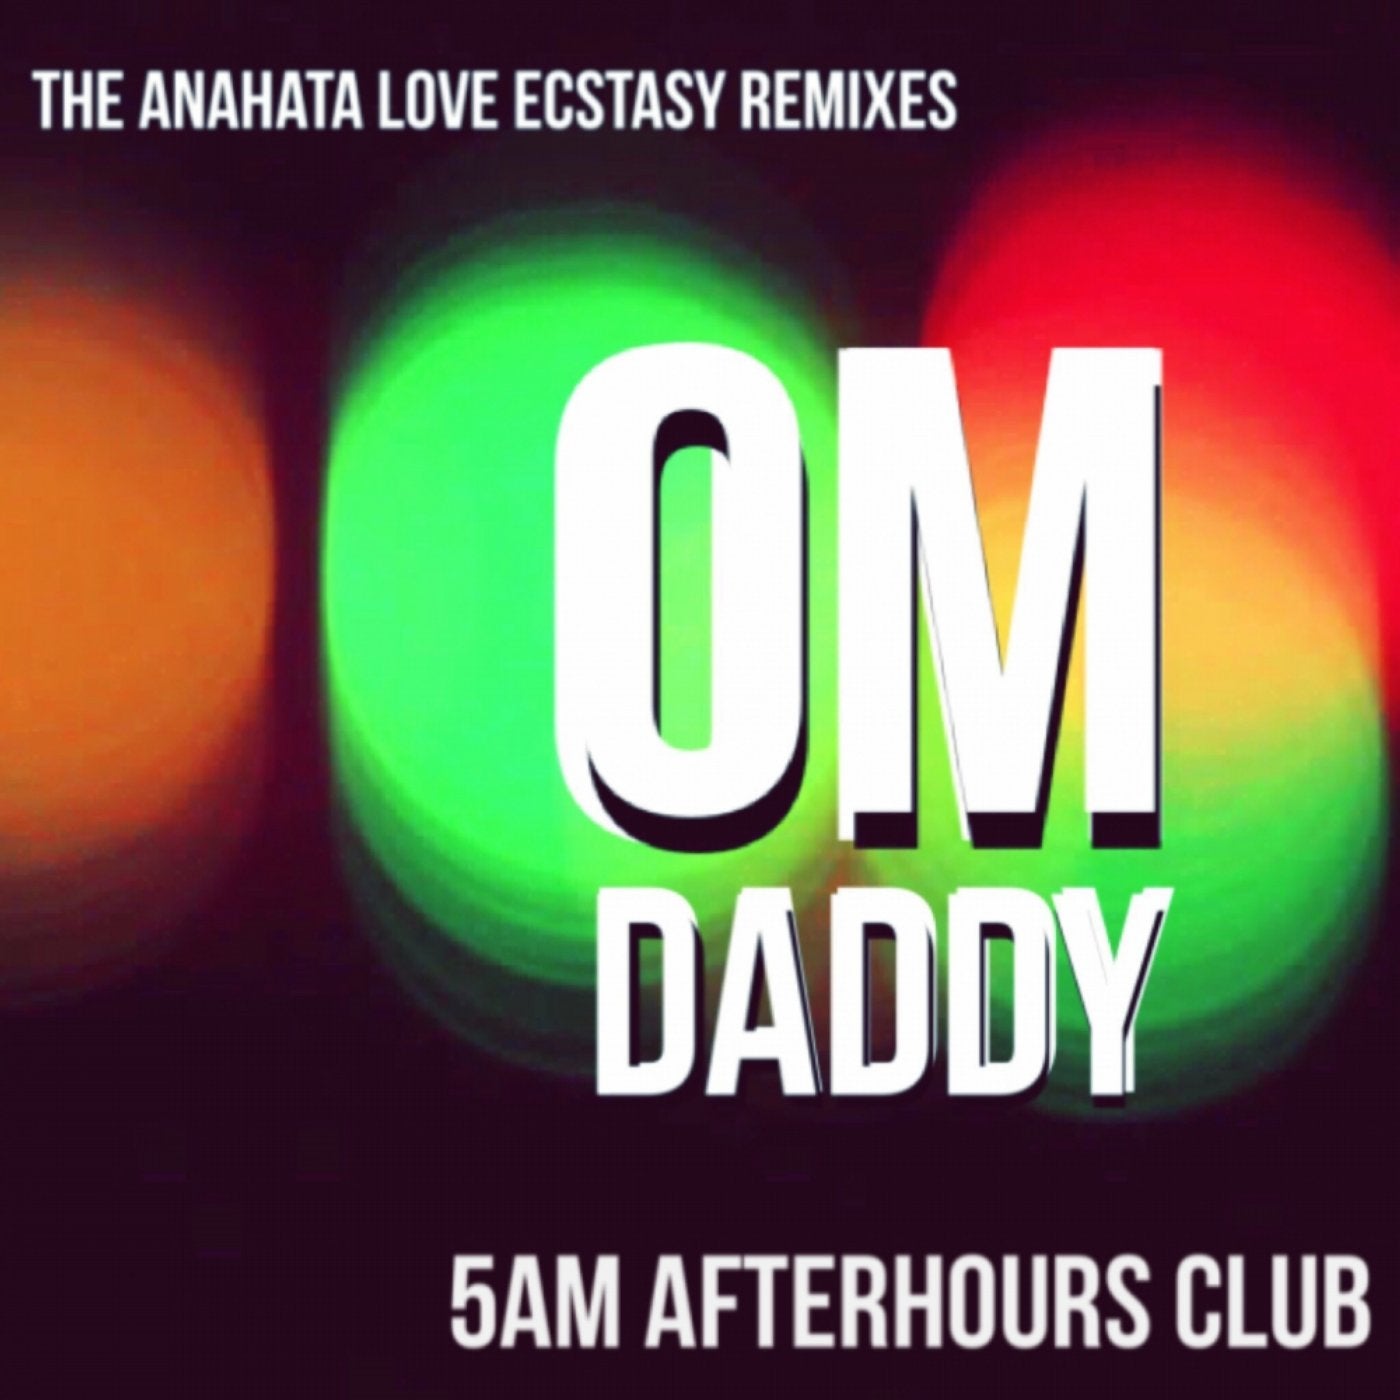 5AM Afterhours Club - The Anahata Love Ecstasy Remixes